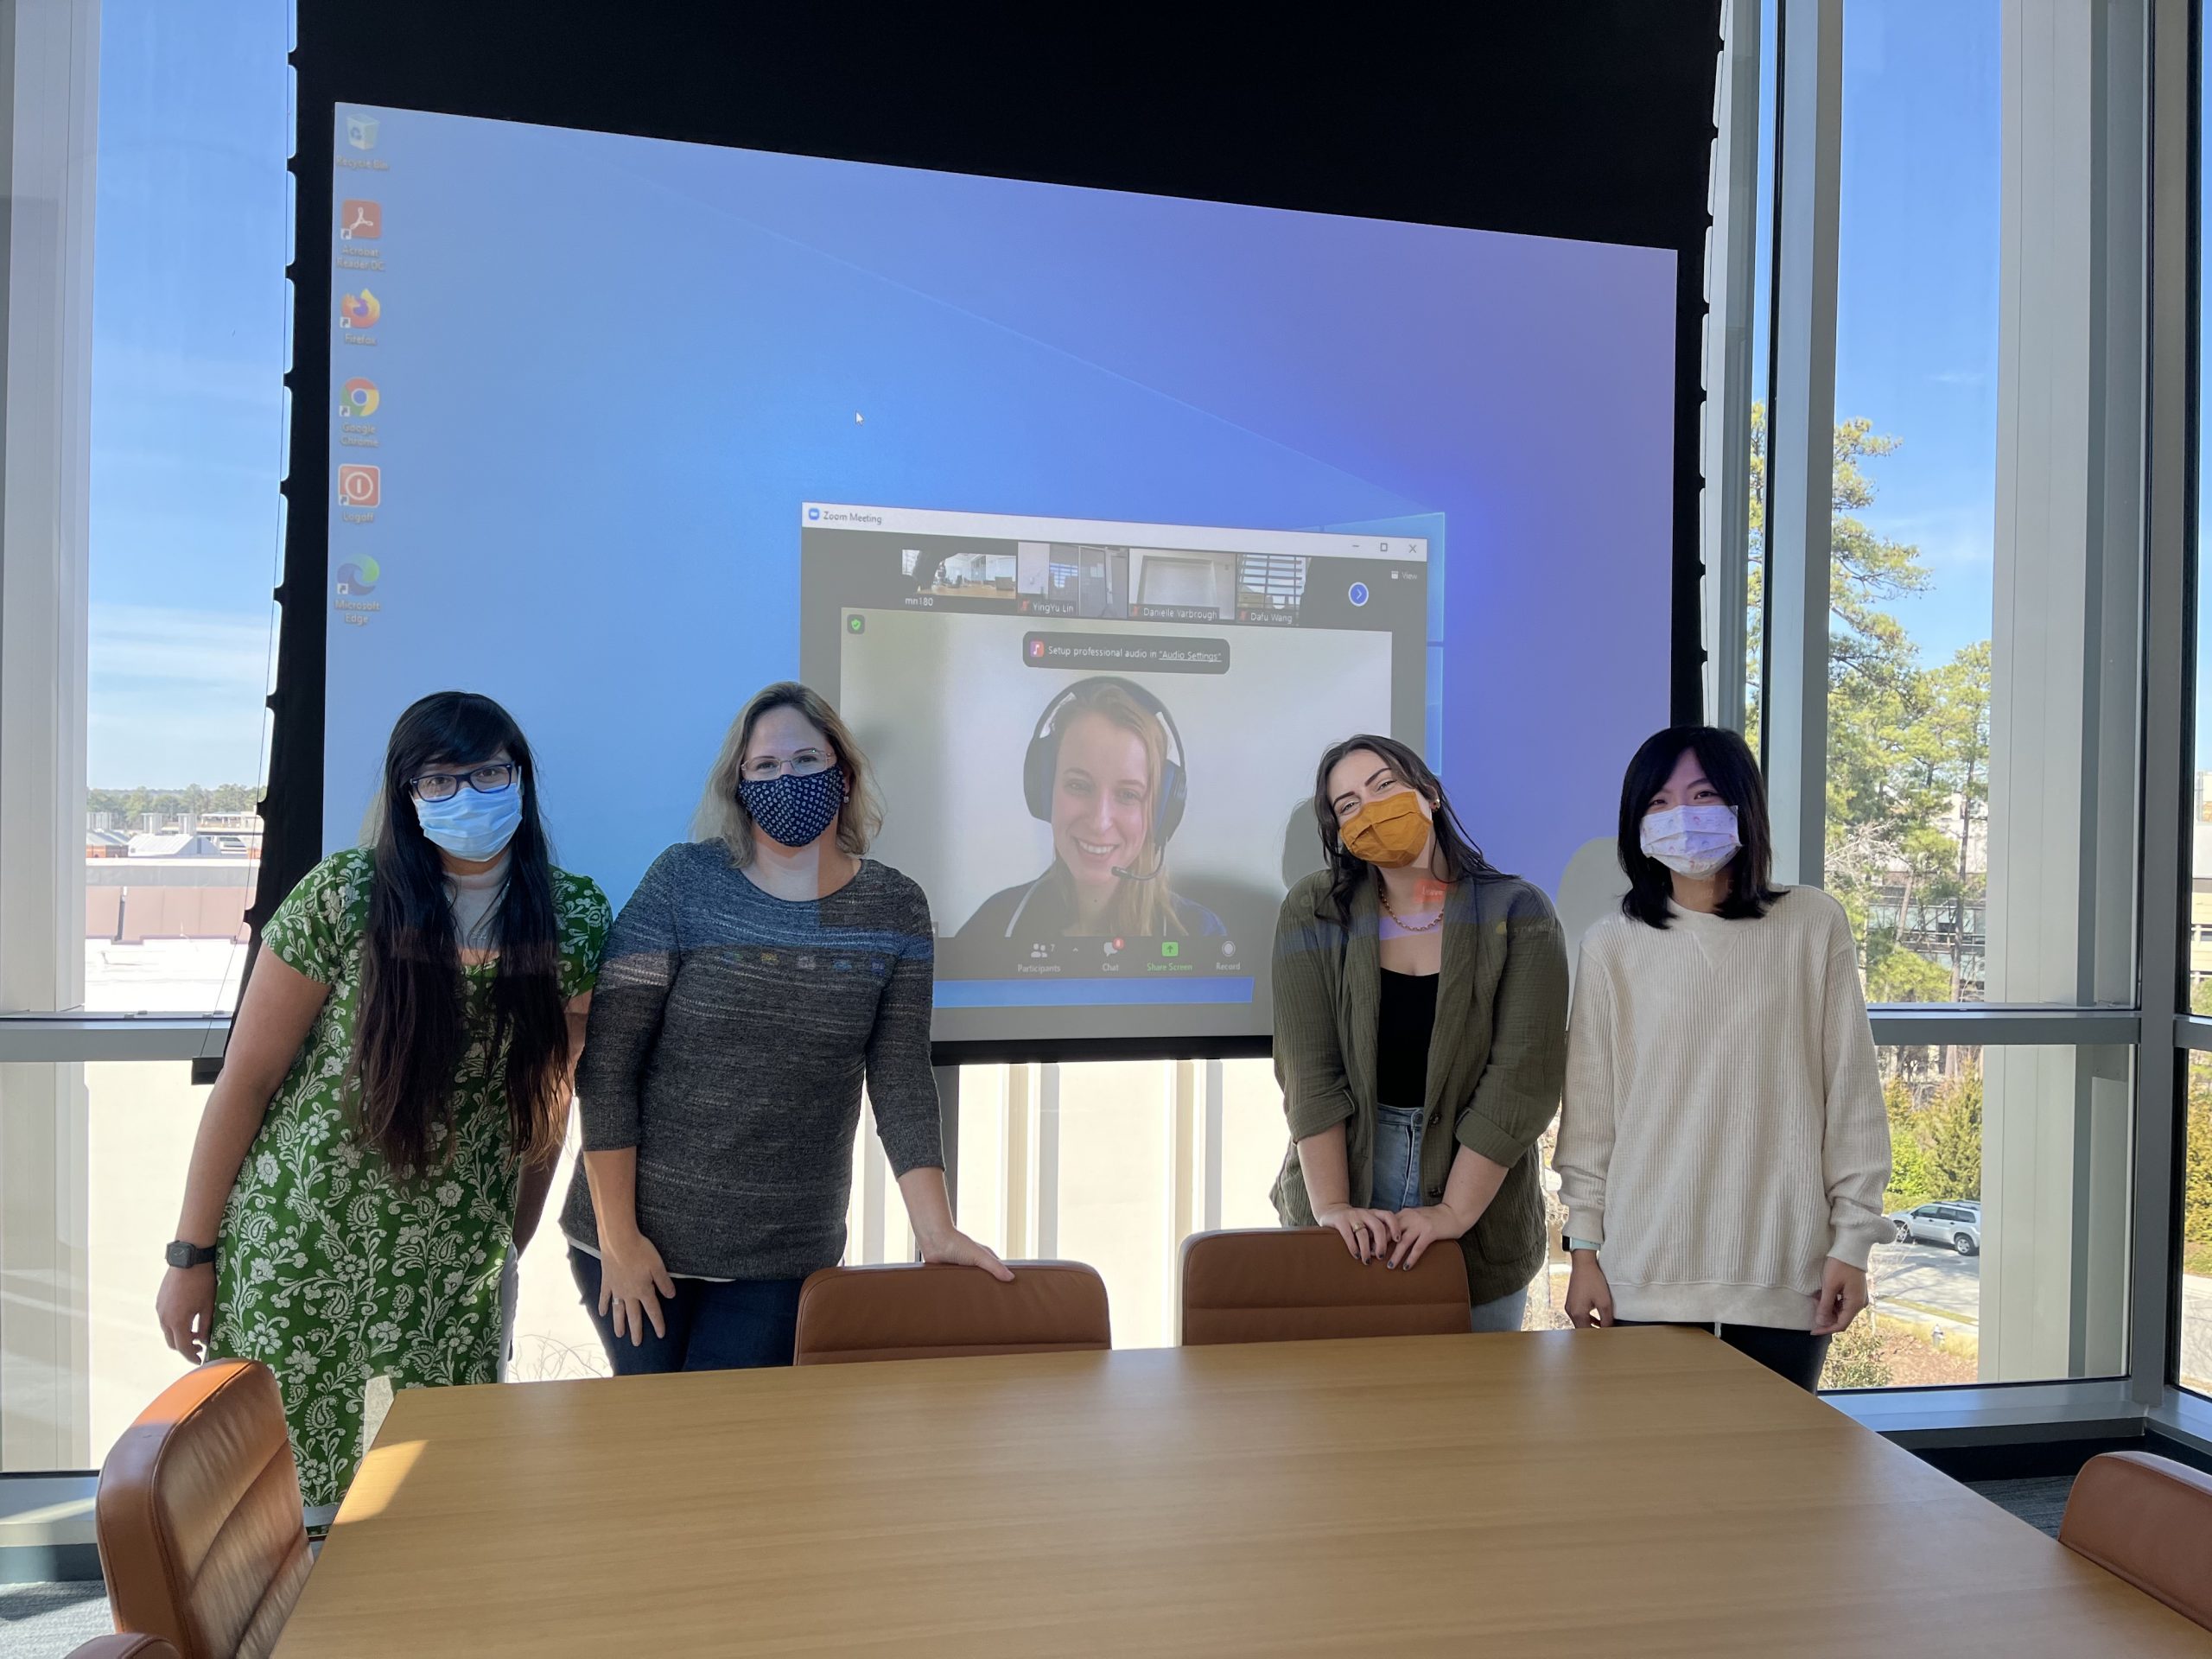 From Left: Taylor, Dr. Gerecht, Dr. Volkova, Danielle, and YingYu